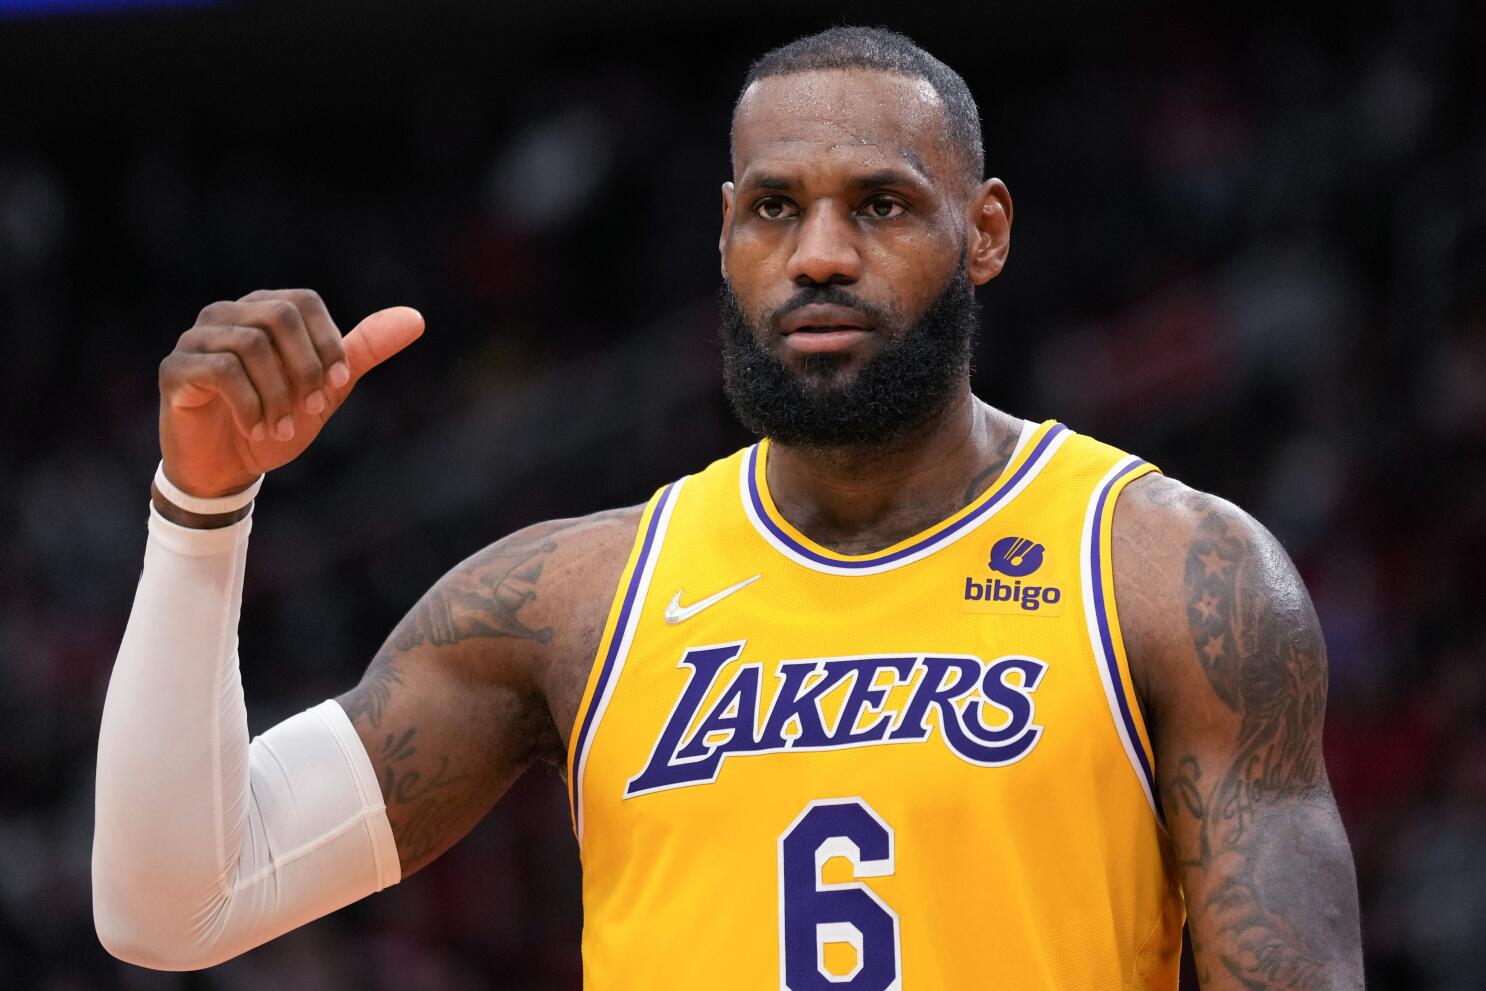 LeBron James posts photos in full Lakers jersey for first time